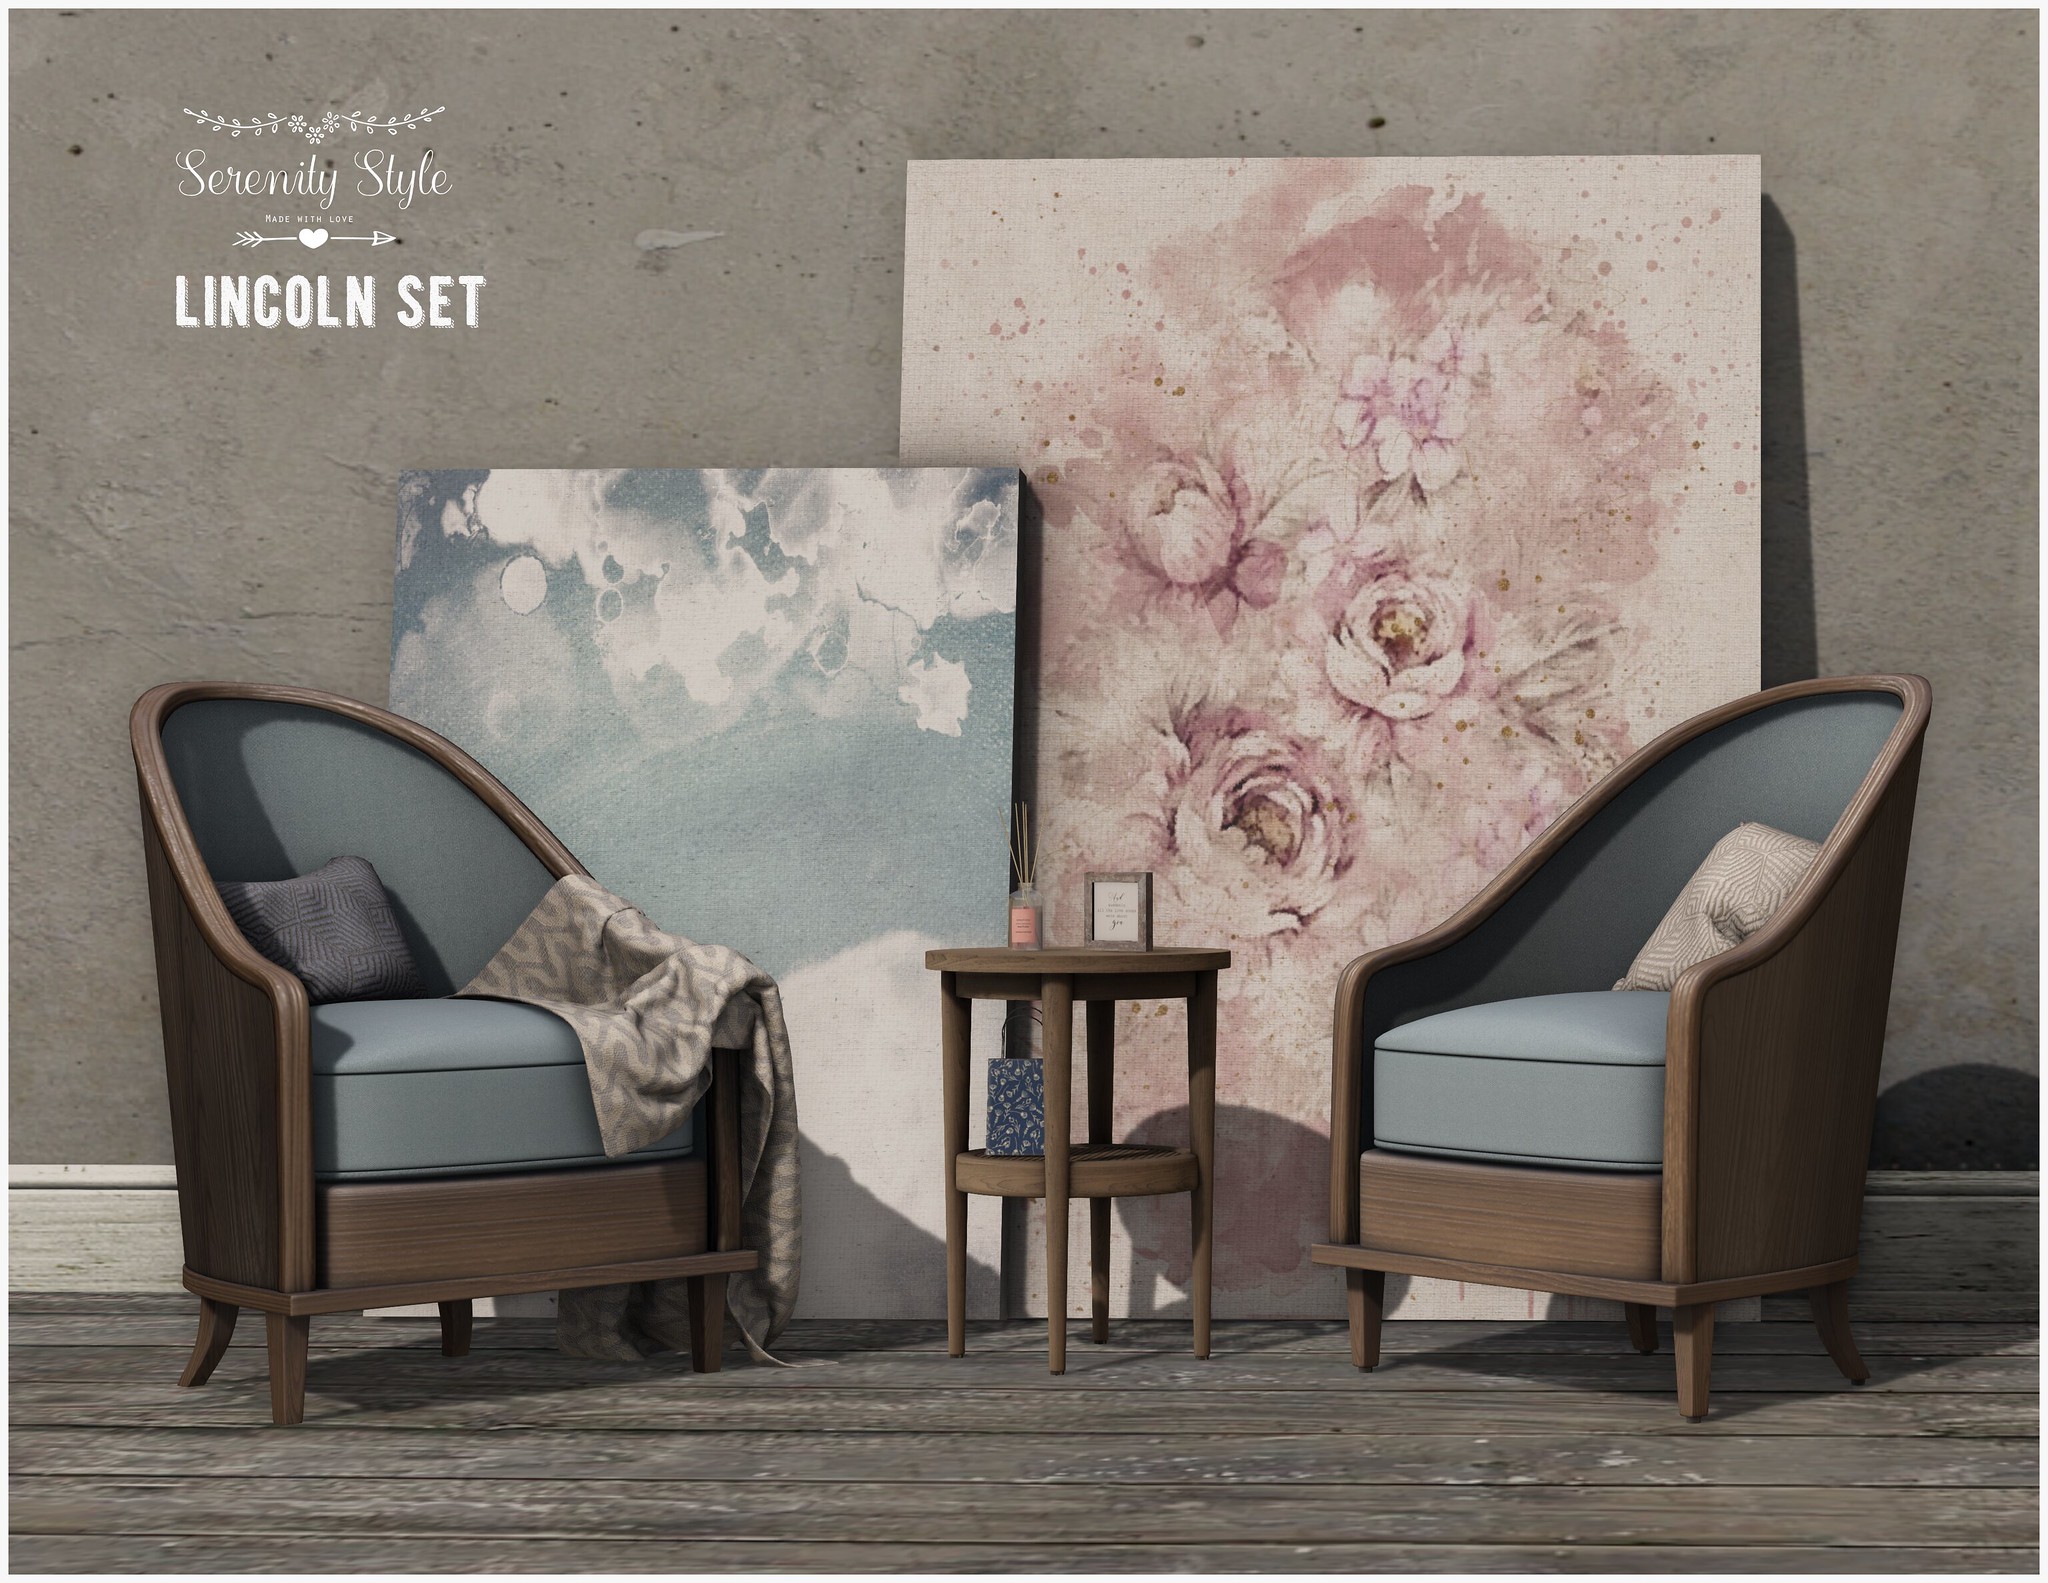 Serenity Style – Lincoln Set